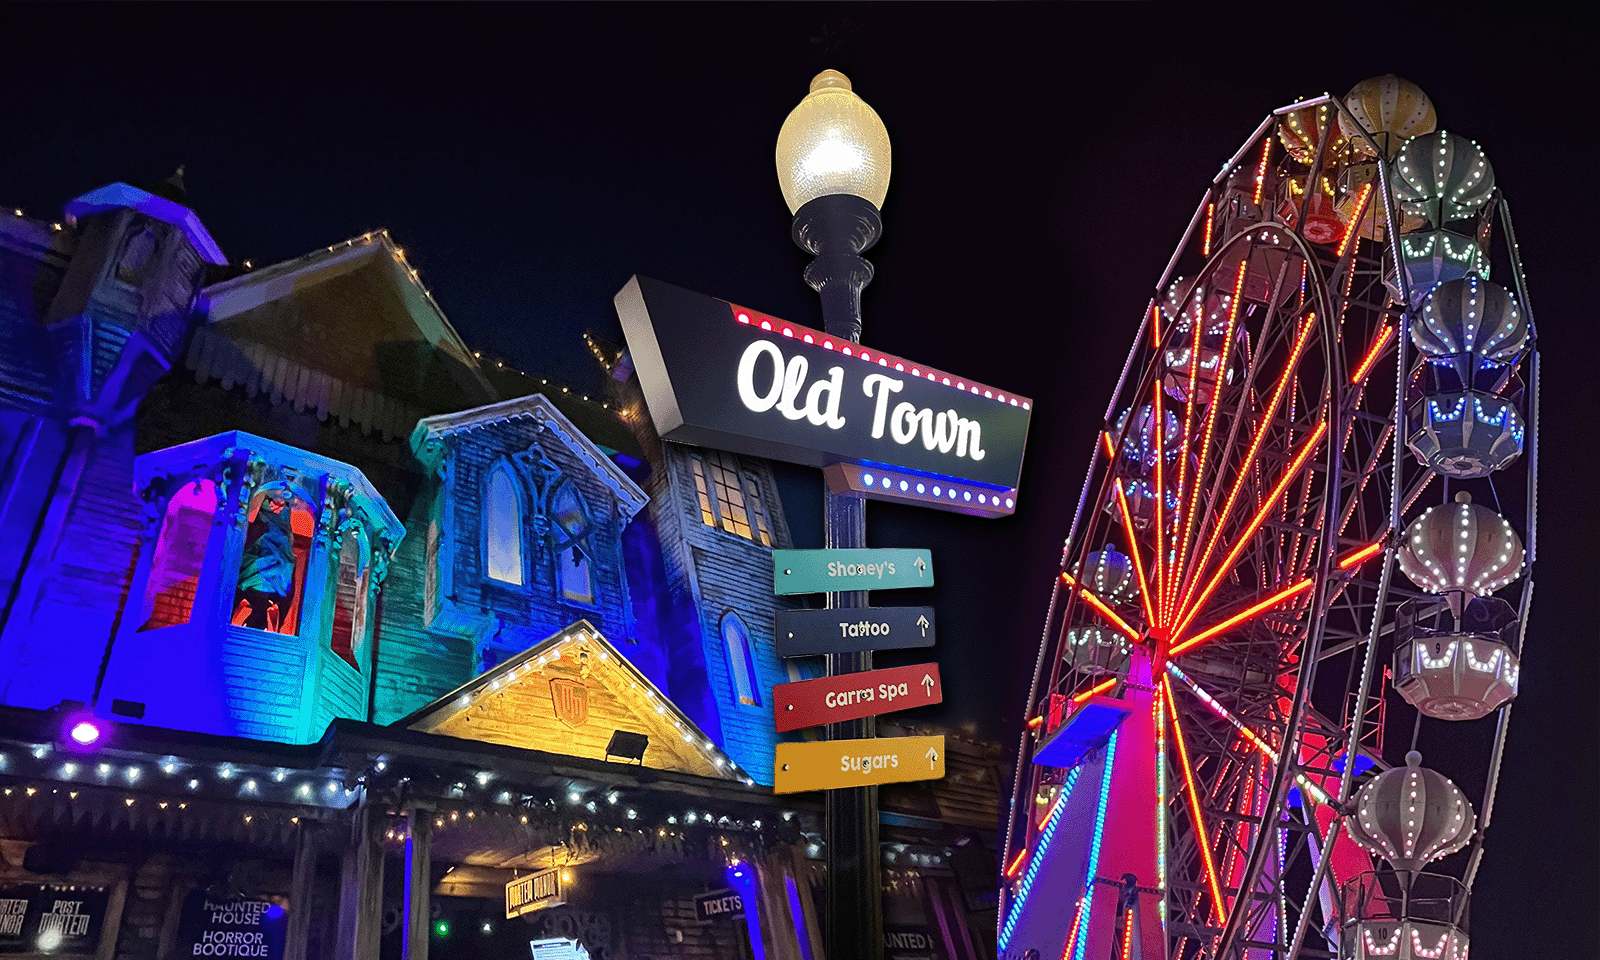 black background with bright neon lights on a mansion and ferris wheel with old town sign